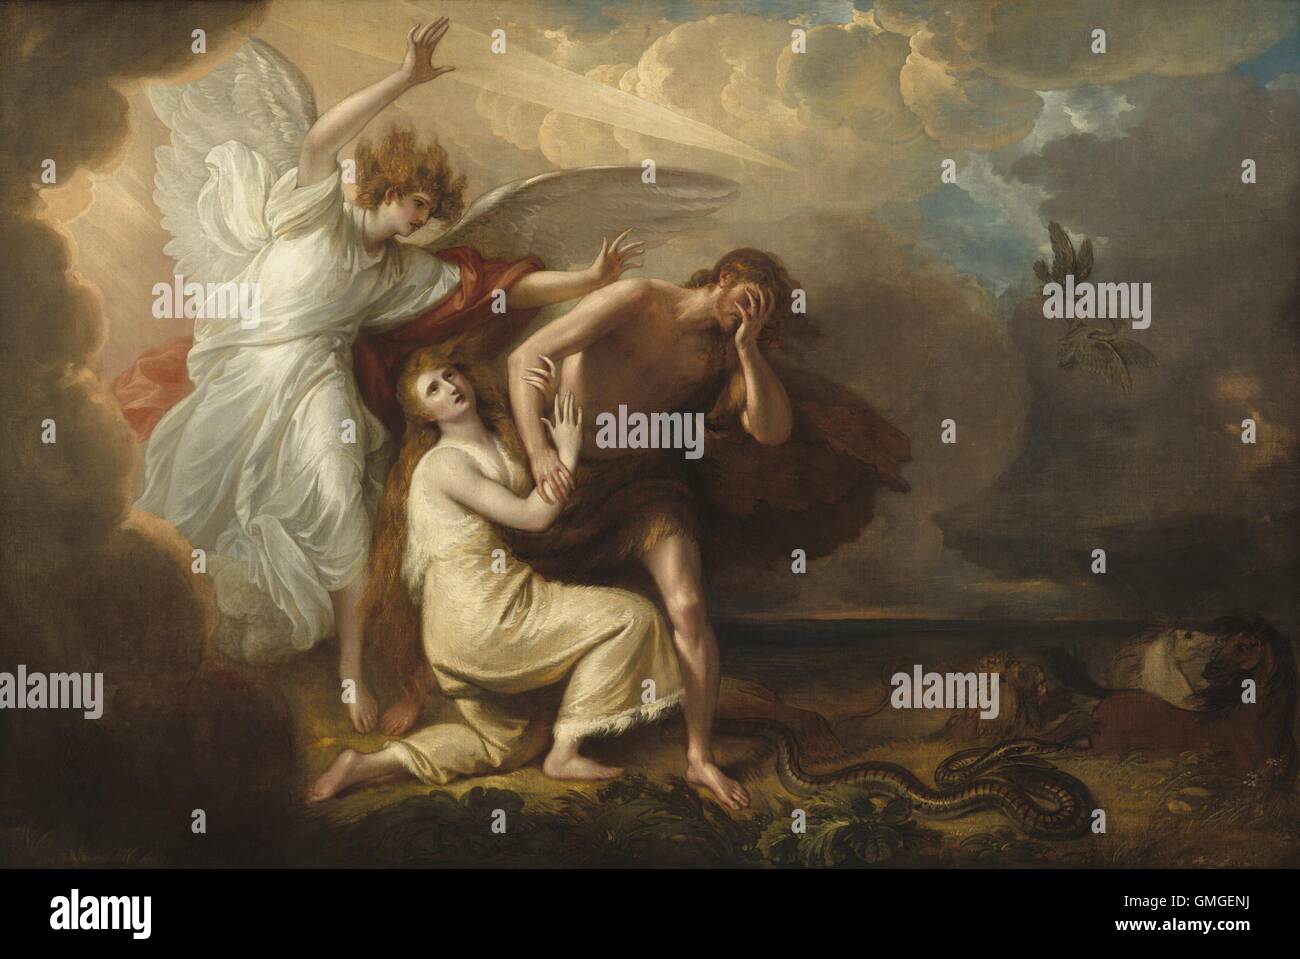 The Expulsion of Adam and Eve from Paradise, 1791, by Benjamin West, by Anglo-American painting, oil on canvas. Archangel Michael expels Adam and Eve, who wear coats of skins' from Eden. The serpent, slithers away on its belly to eat dust. The sharp beam (BSLOC 2016 6 220) Stock Photo